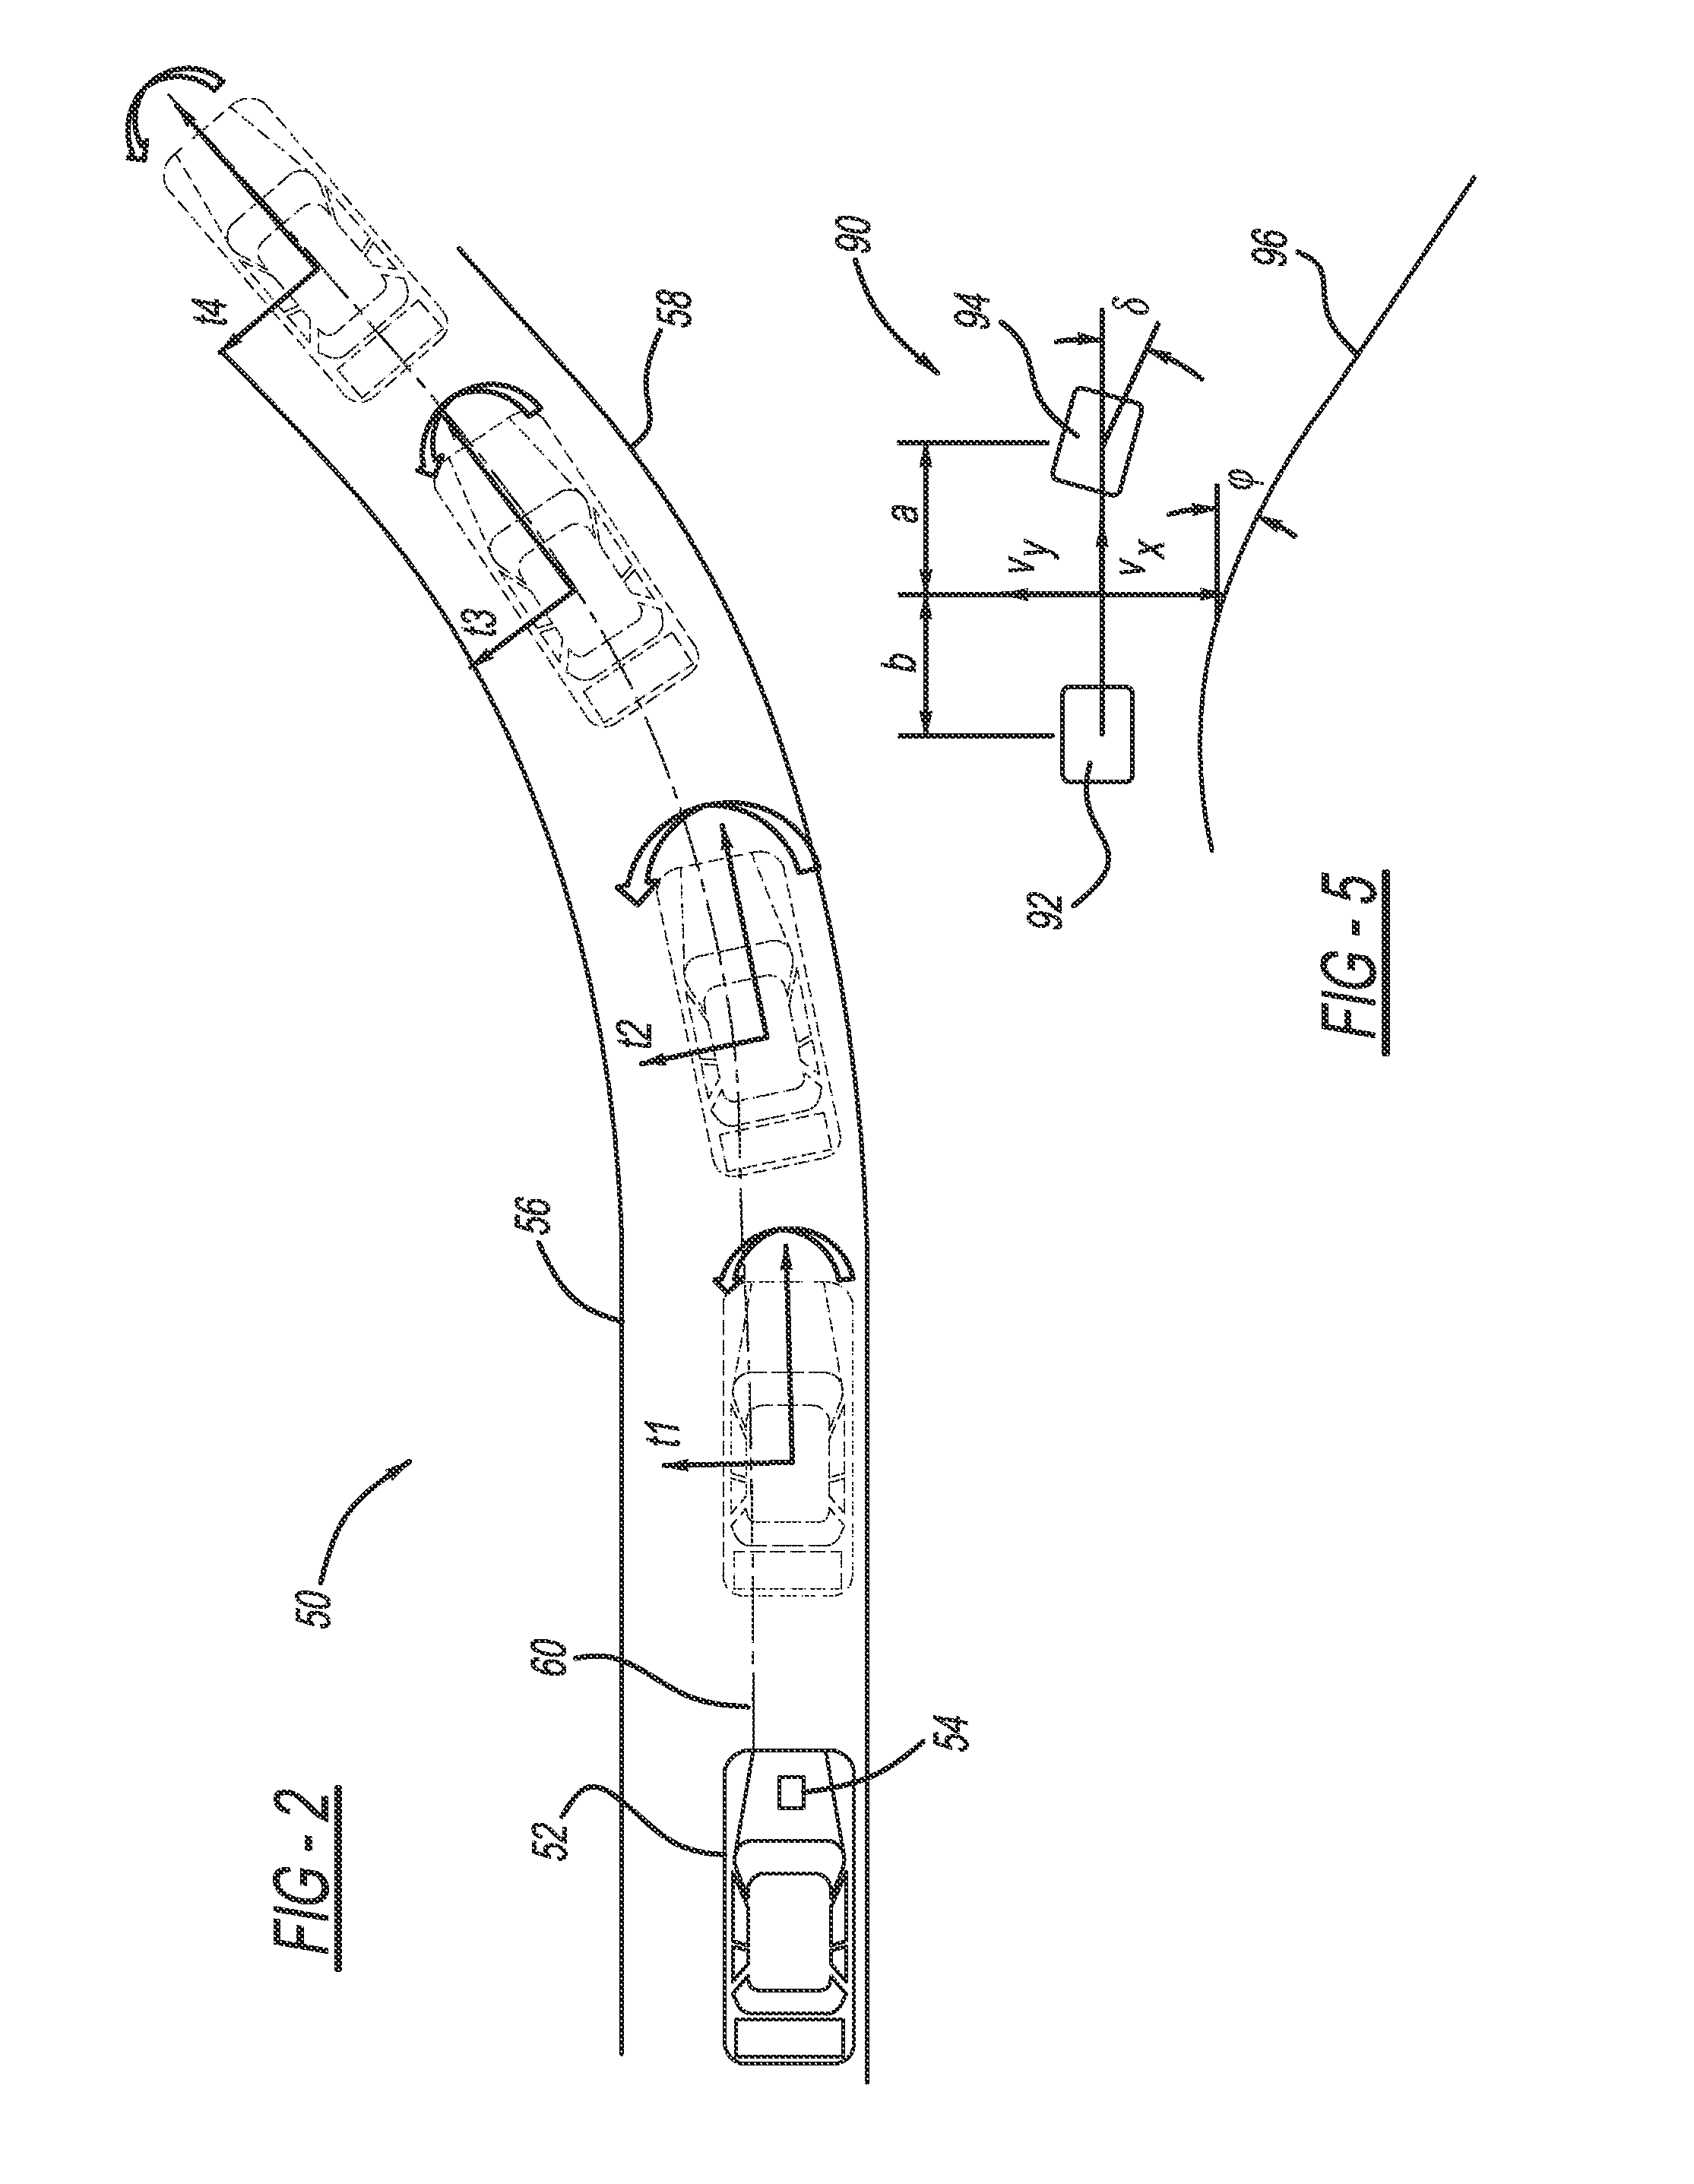 Algorithm for steering angle command to torque command conversion